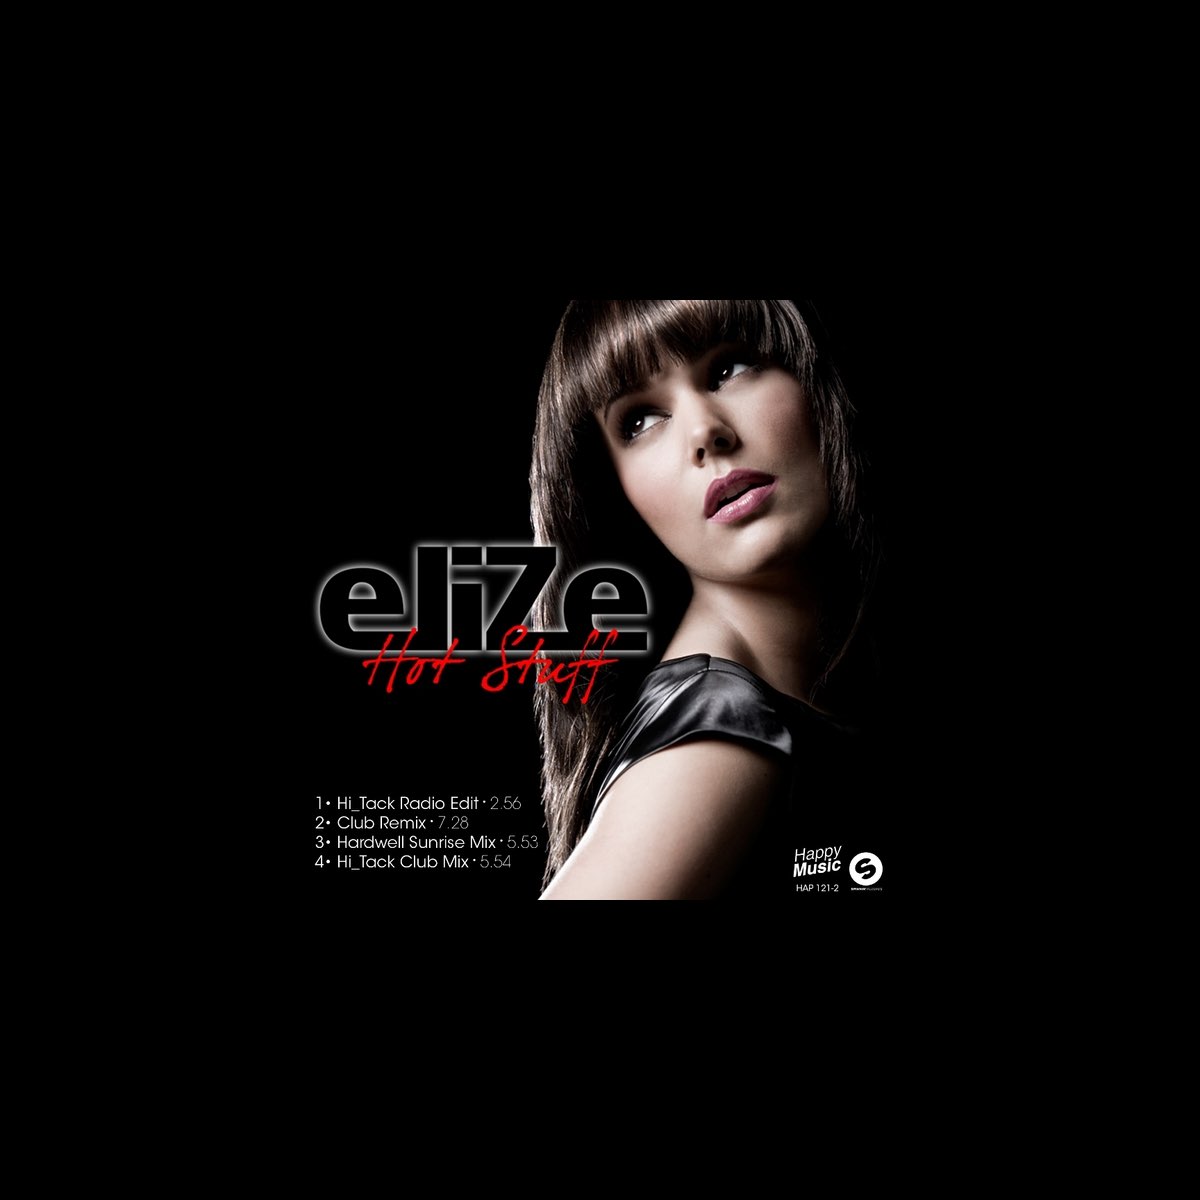 Hot Stuff - EP by Elize on Apple Music